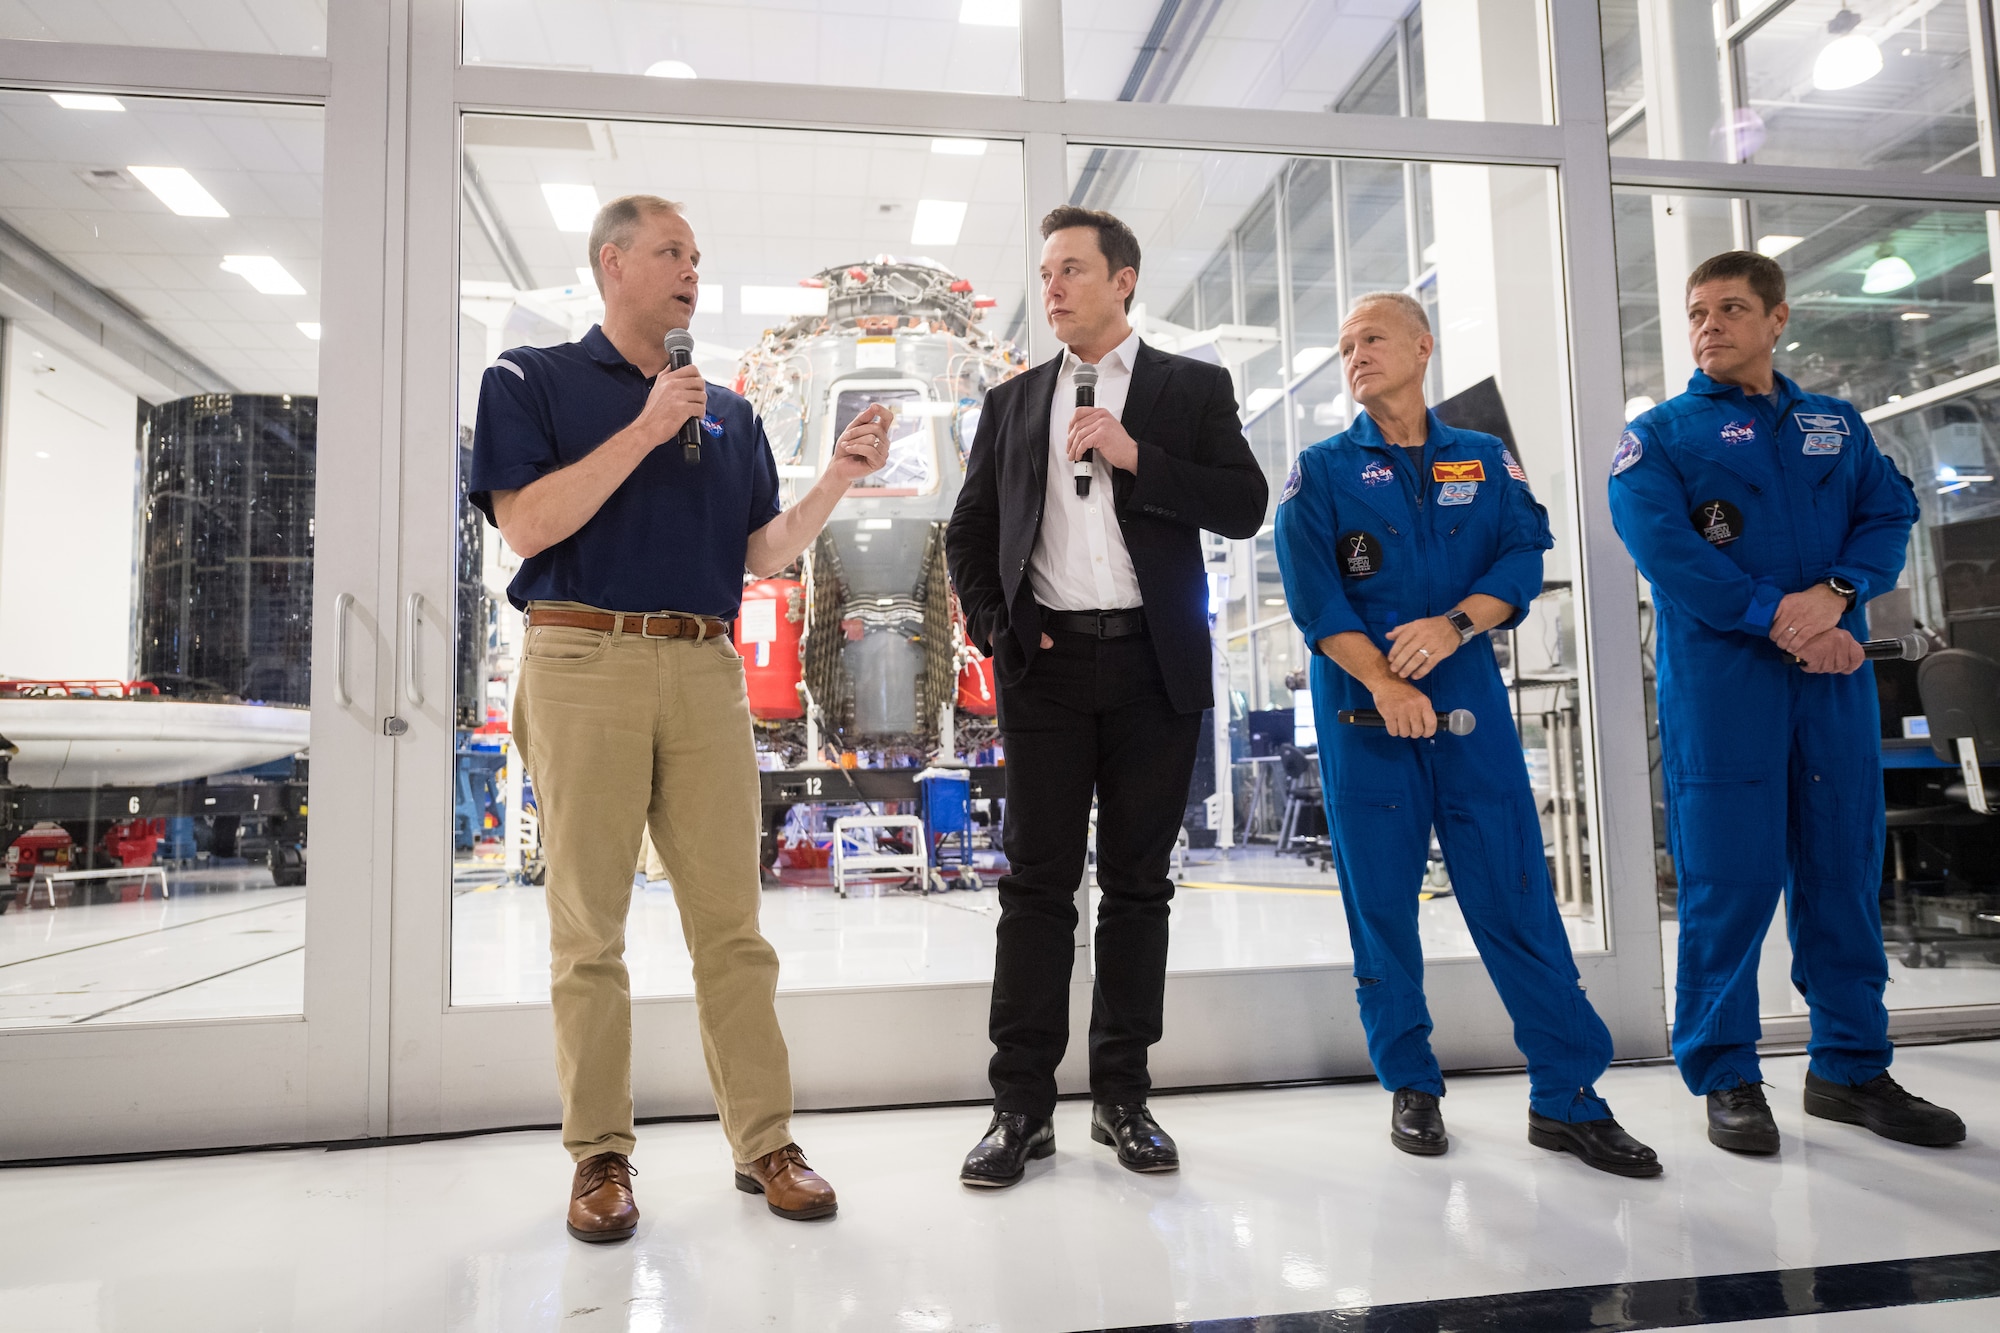 NASA Administrator Jim Bridenstine, left, speaks to press with SpaceX Chief Engineer Elon Musk, second from left, NASA astronaut Doug Hurley, second from right, and NASA astronaut Bob Behnken, in front of the Crew Dragon that is being prepared for the Demo-2 mission, at SpaceX Headquarters, Thursday, Oct. 10, 2019 in Hawthorne, CA. Photo credit: (NASA/Aubrey Gemignani)